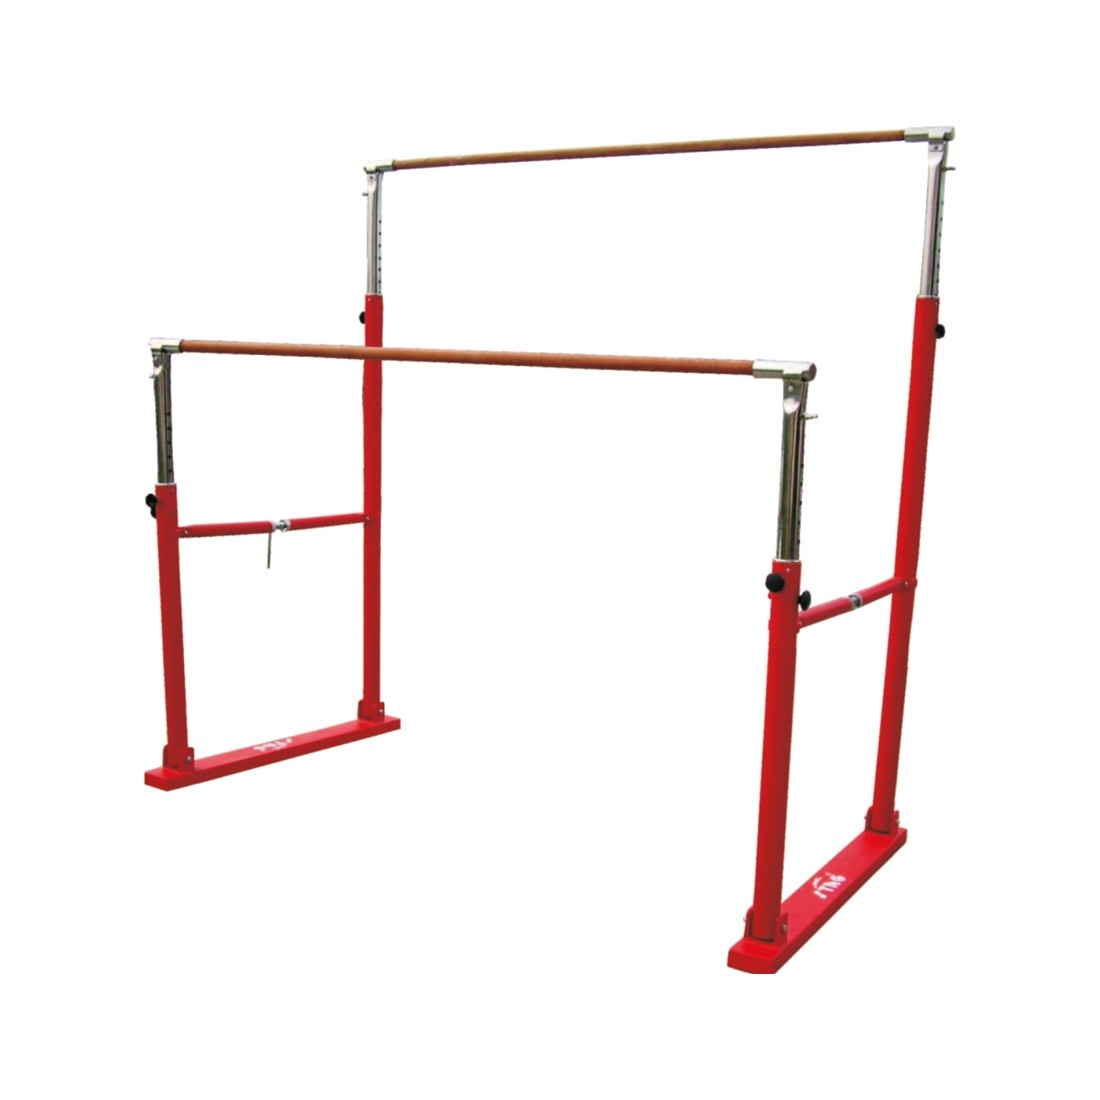 STAG UNEVEN BAR / ASSYMETRIC BAR LATEST WOOD COVERED FIBRE GLASS